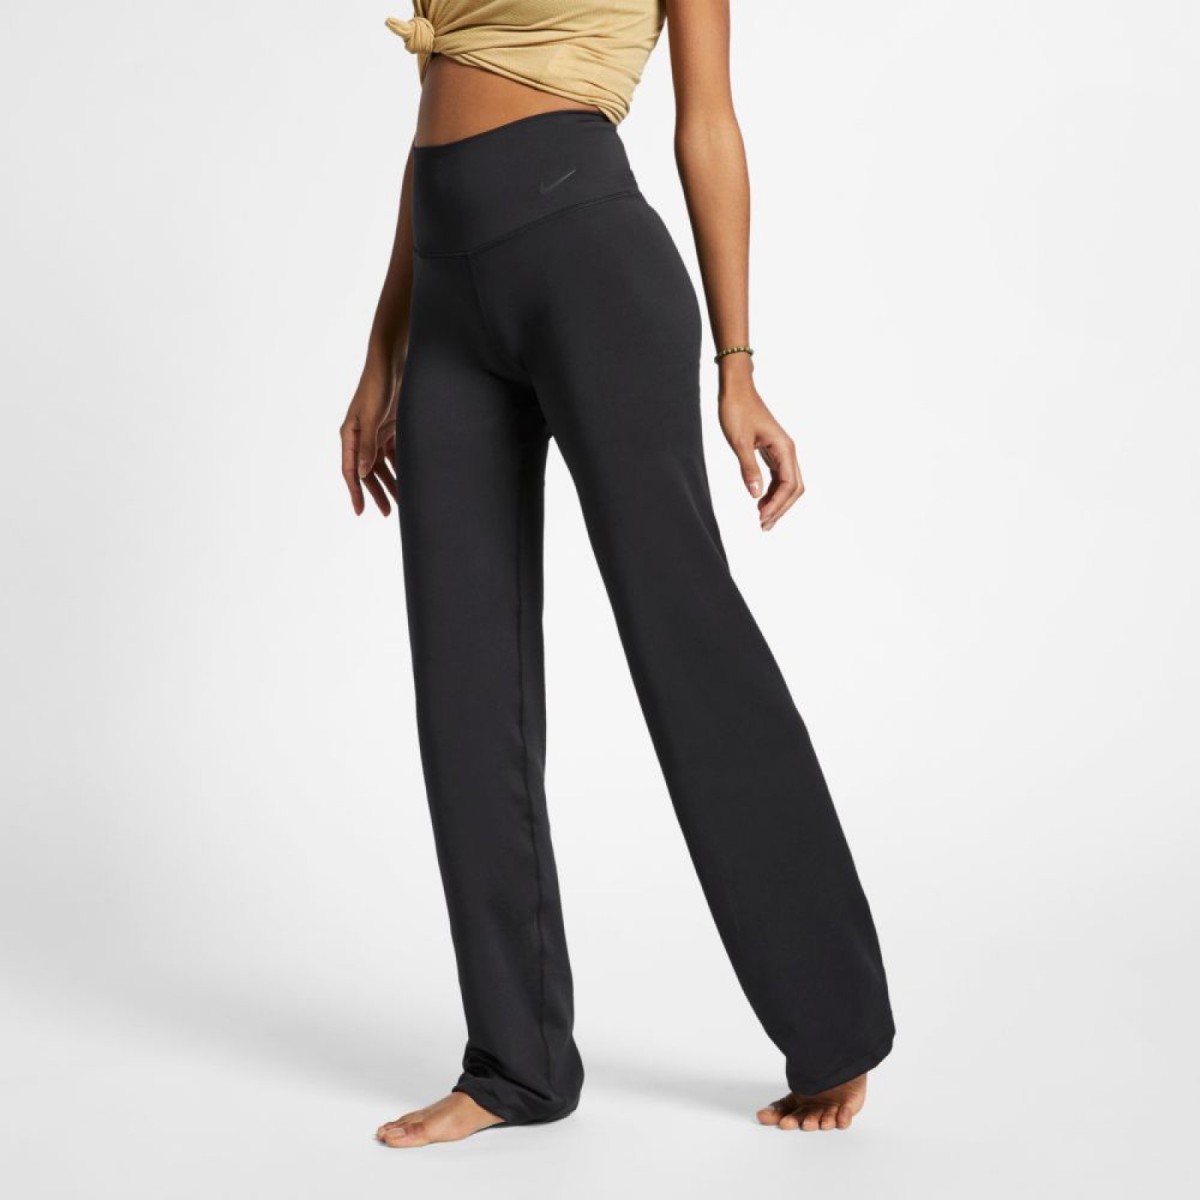 Nike Power Yoga Pants Black / Black A staple for every practice, the ...